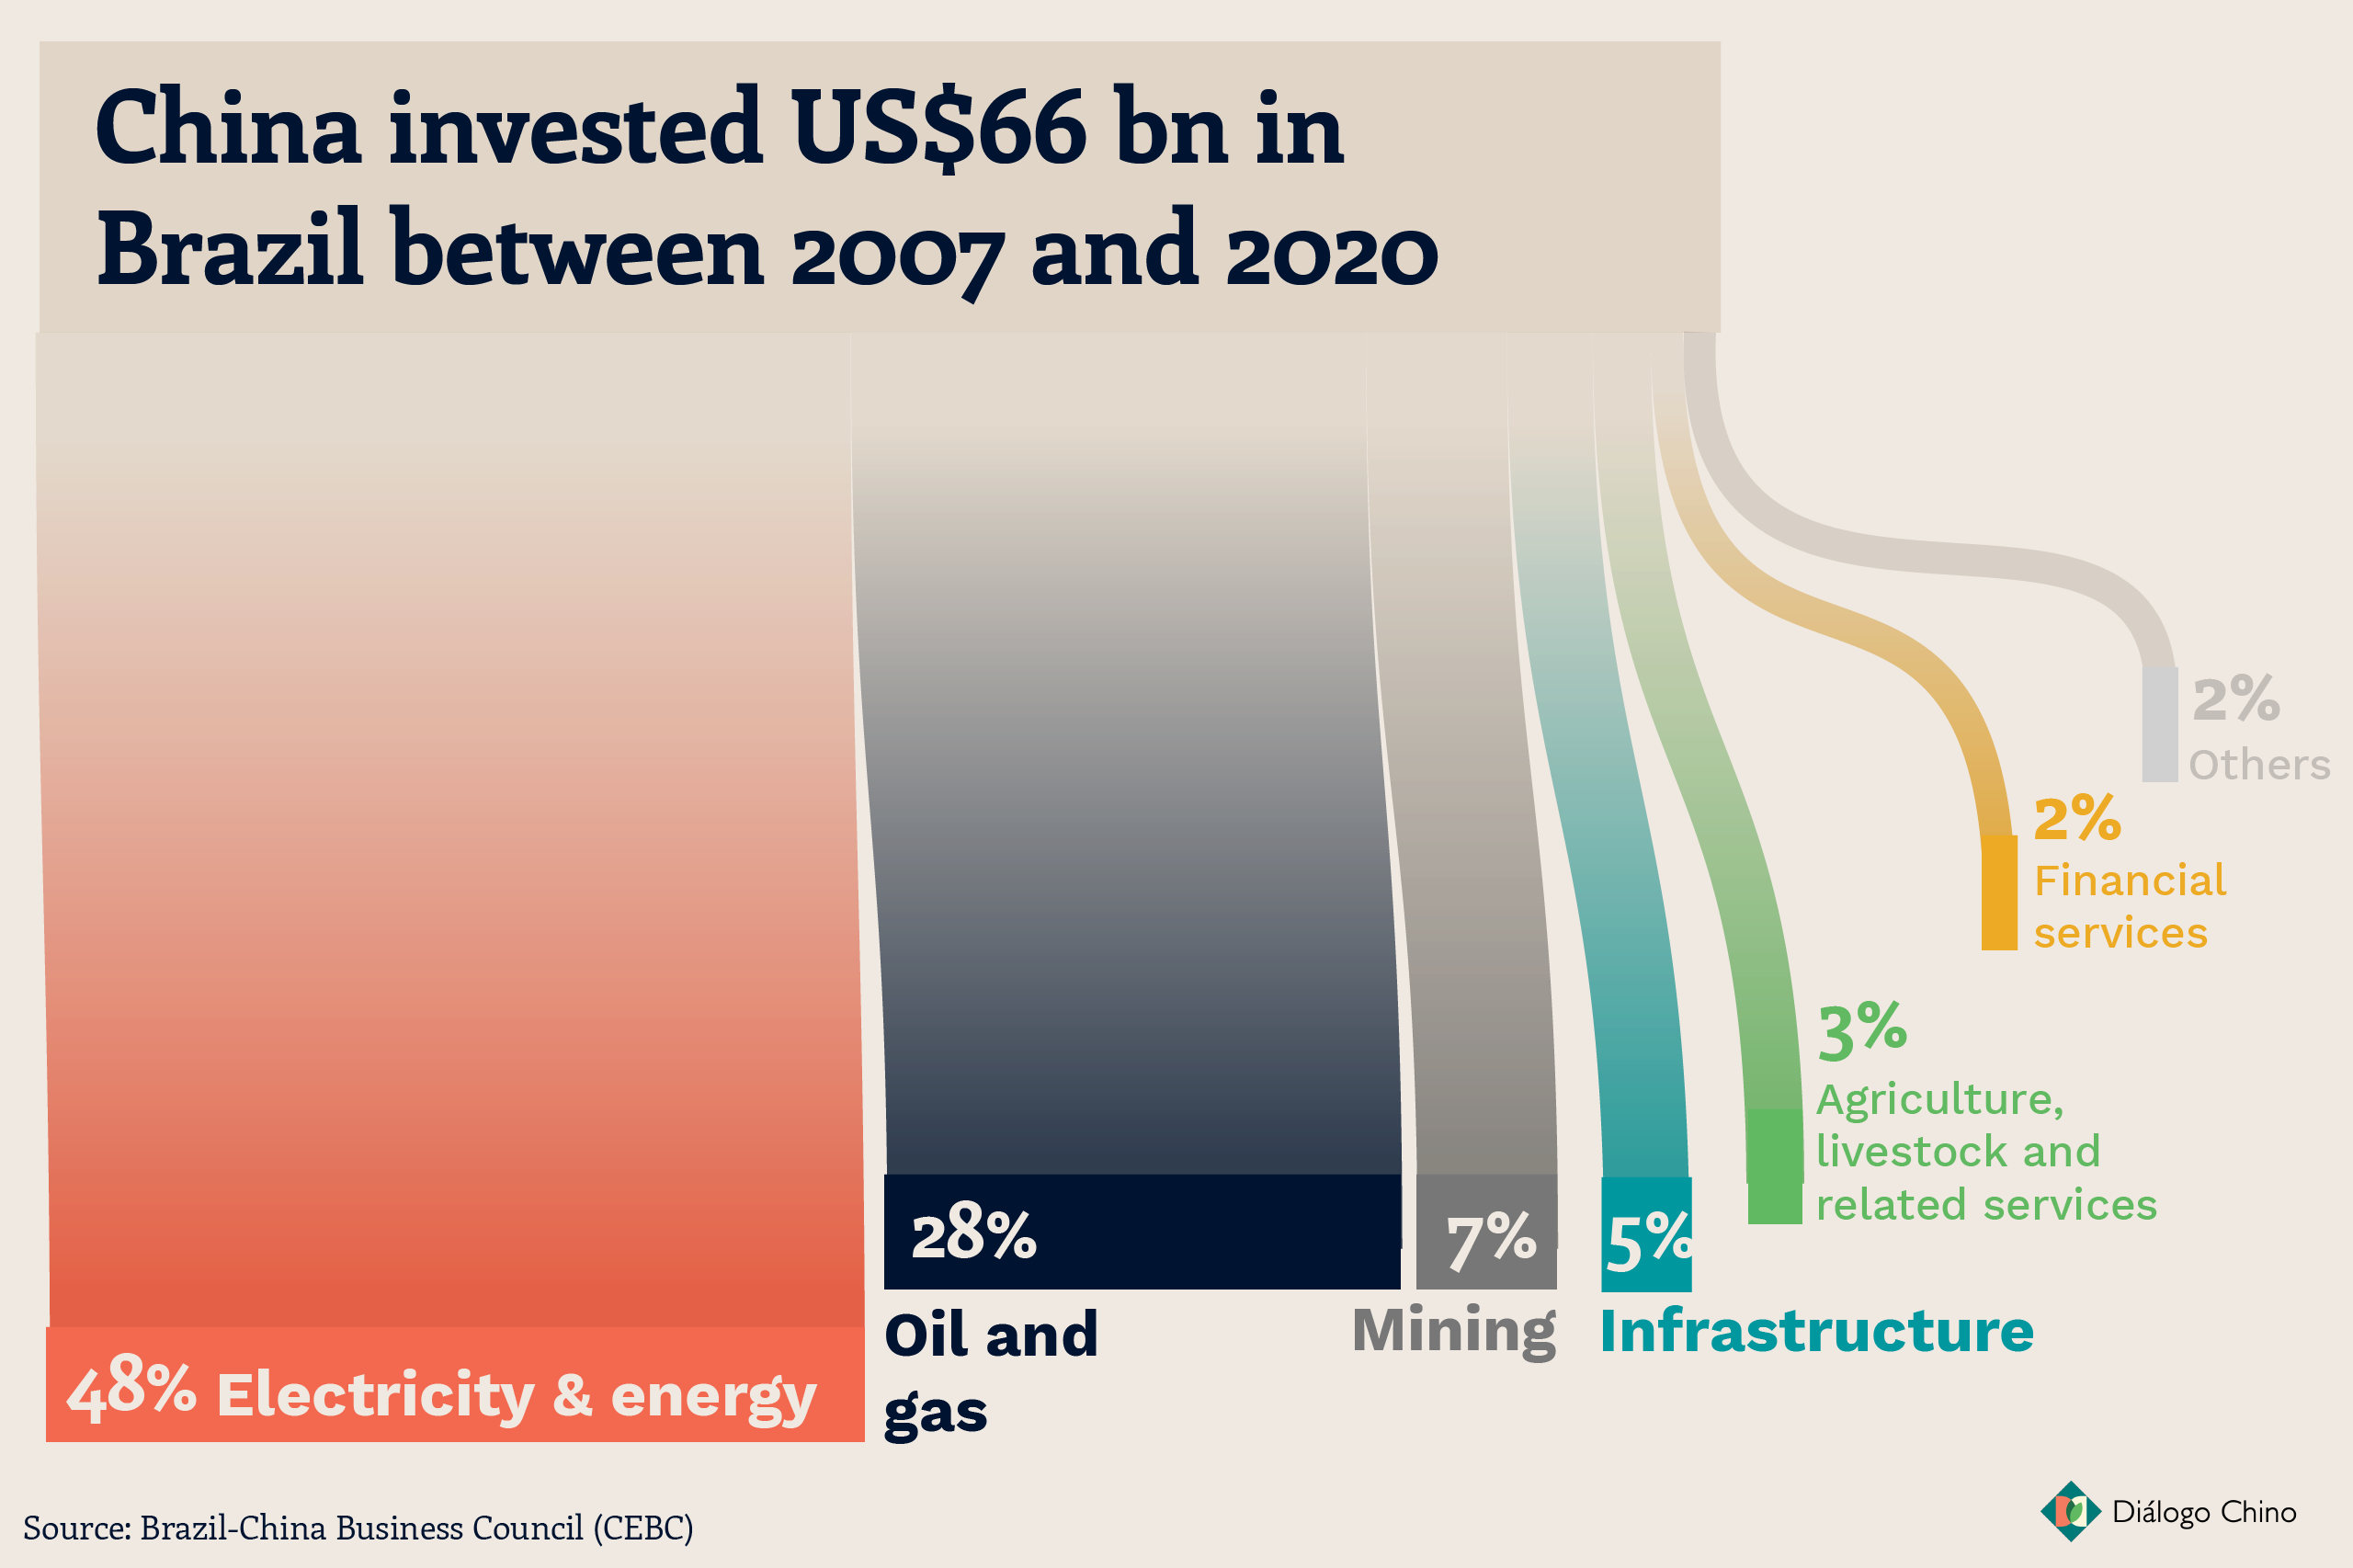 graph showing China's energy investment in Brazil